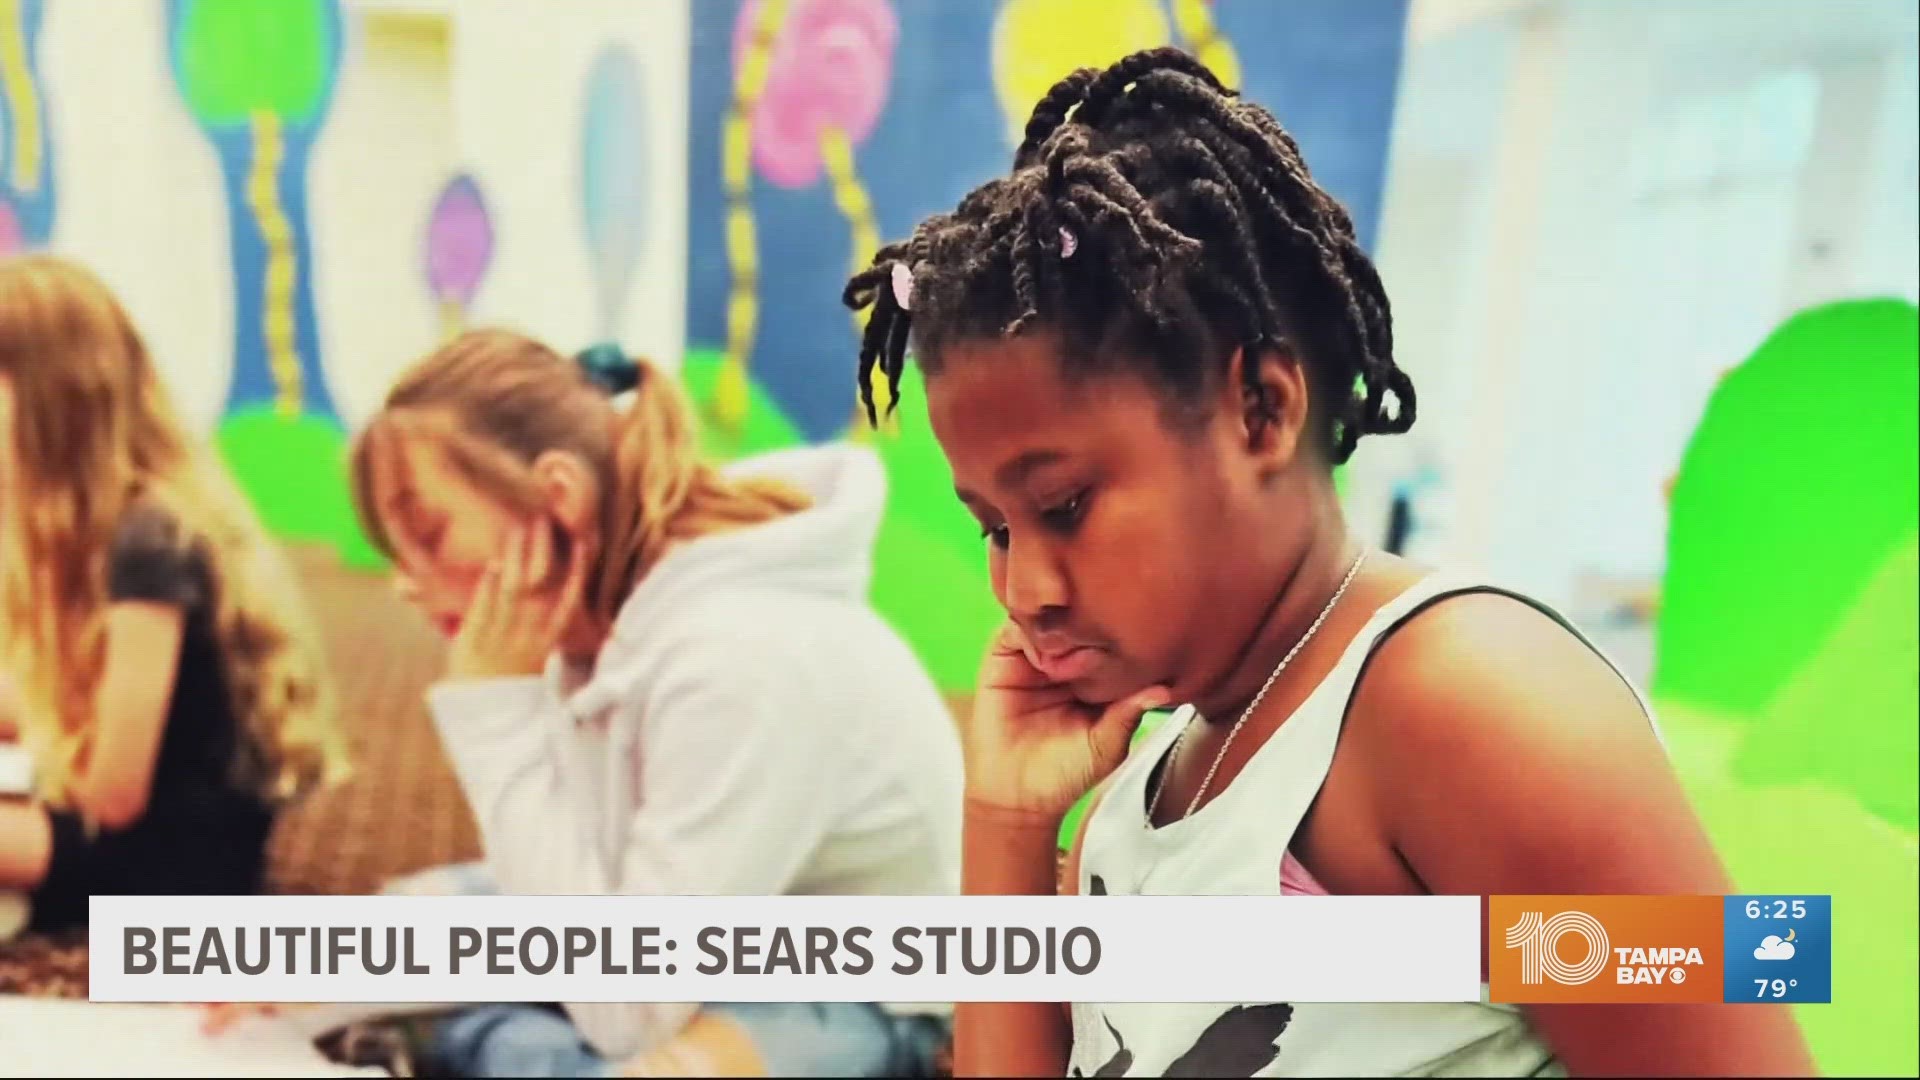 Sears Studio also runs after-school theater programs for kids throughout the year.